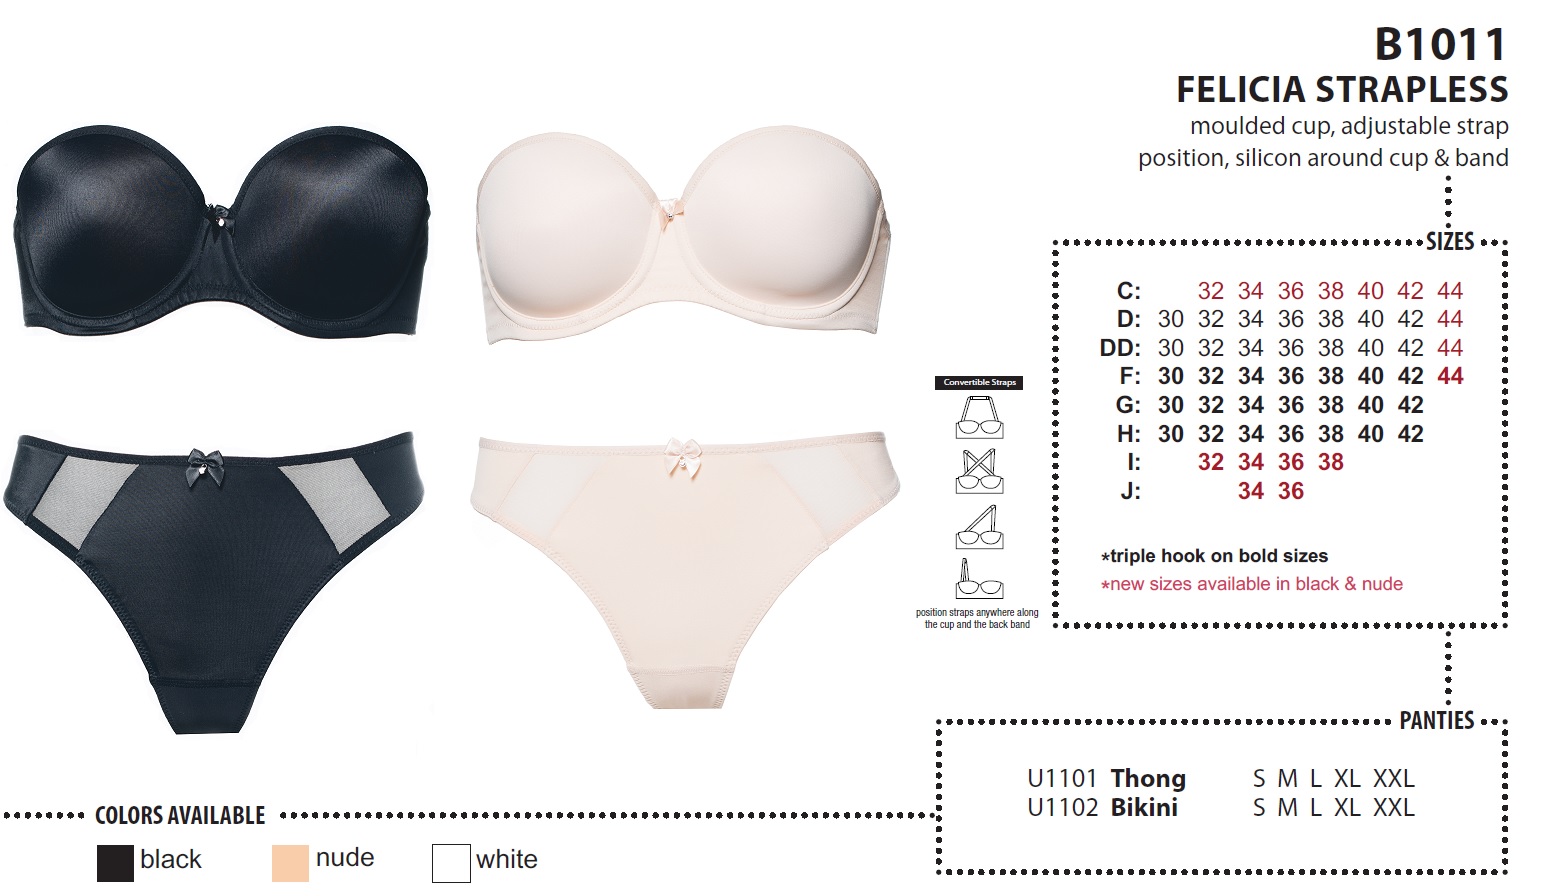 Fit Fully Yours Lingerie – Felicia Strapless